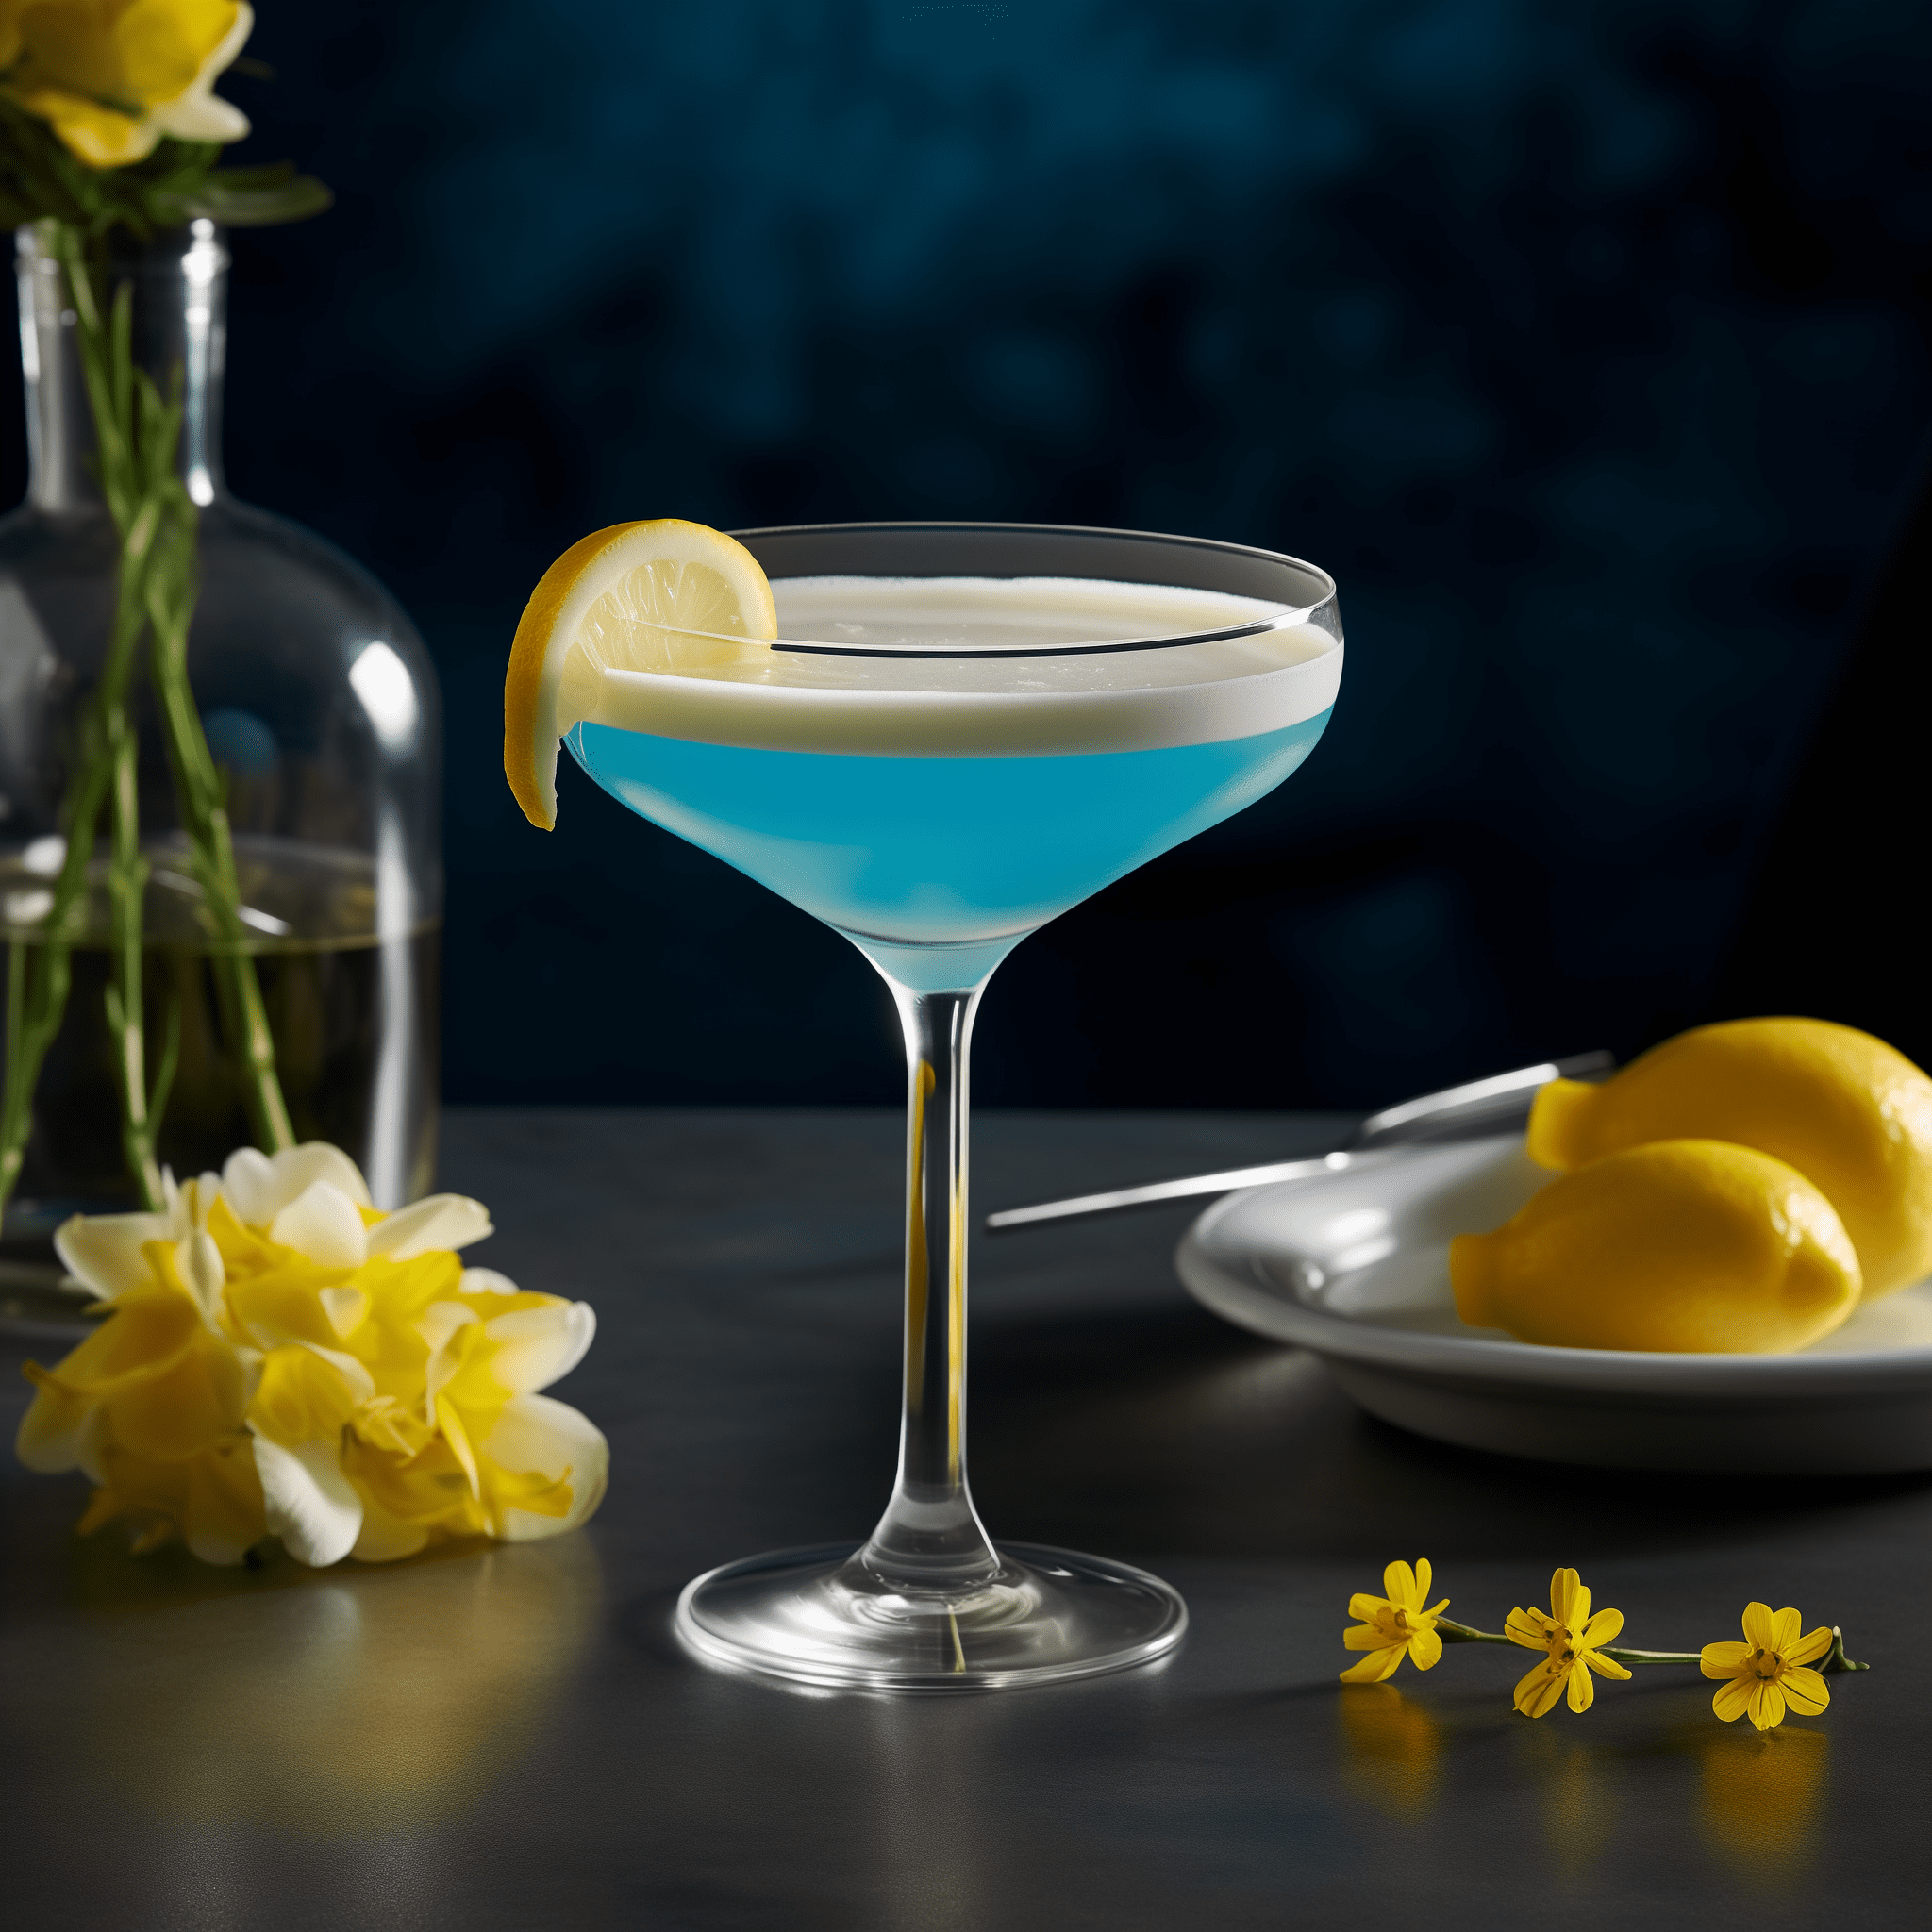 Blue Lady Cocktail Recipe - The Blue Lady cocktail offers a harmonious blend of sweet and sour with a creamy texture. The citrus tang from the lemon juice is perfectly balanced by the sweetness of the blue curaçao, while the gin provides a complex botanical backdrop. The egg white adds a smooth, frothy finish that rounds out the drink.